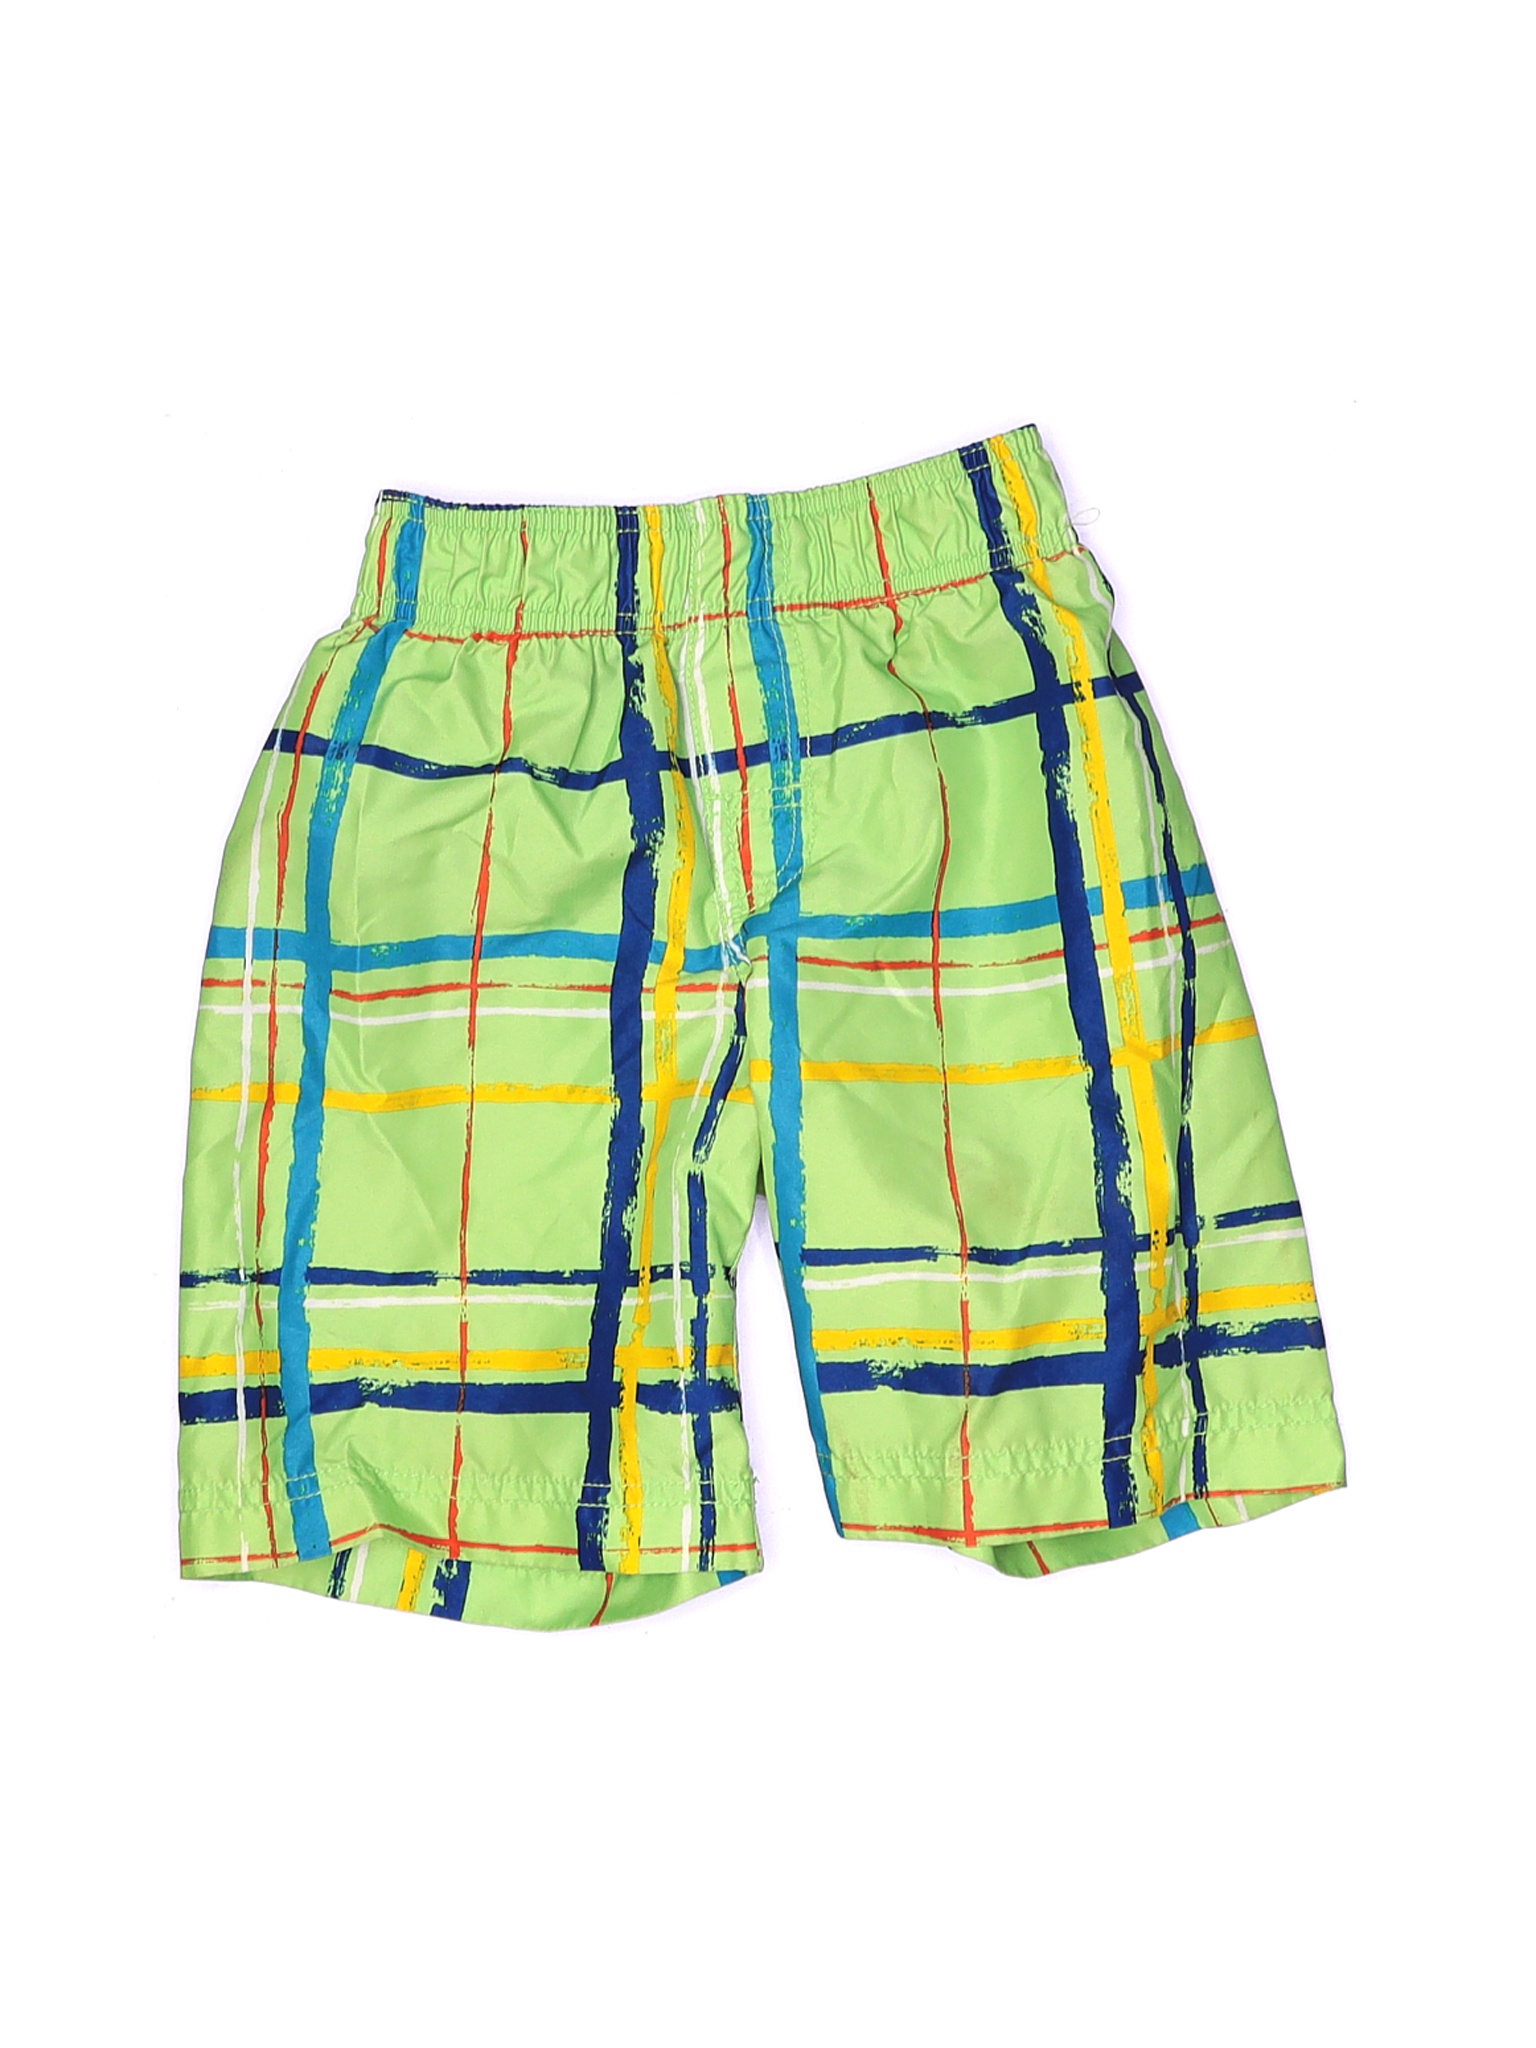 The Children's Place Boys Green Shorts S Youth | eBay